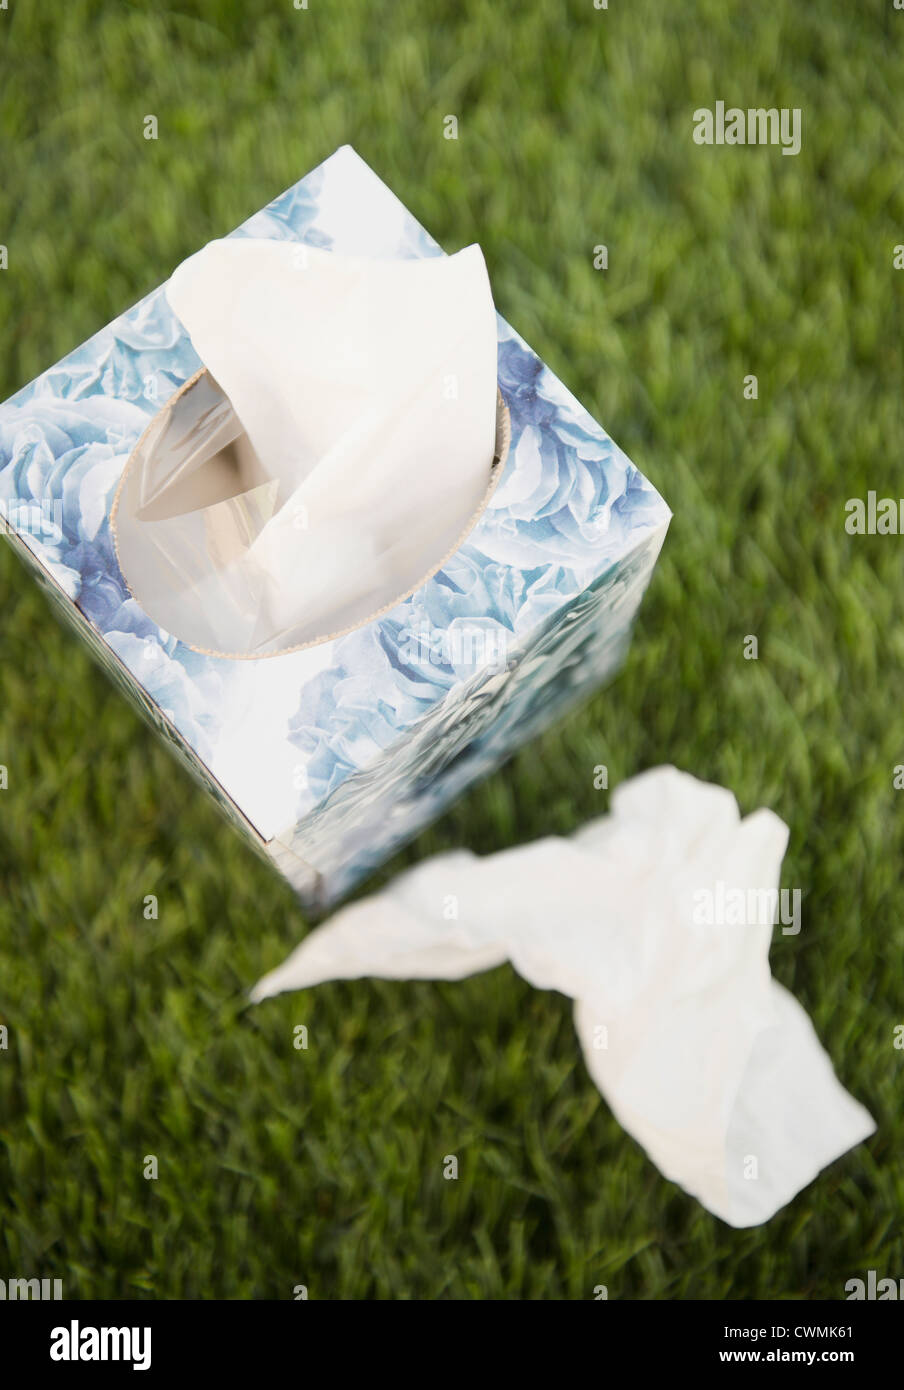 Tissue box and tissues on green grass Stock Photo